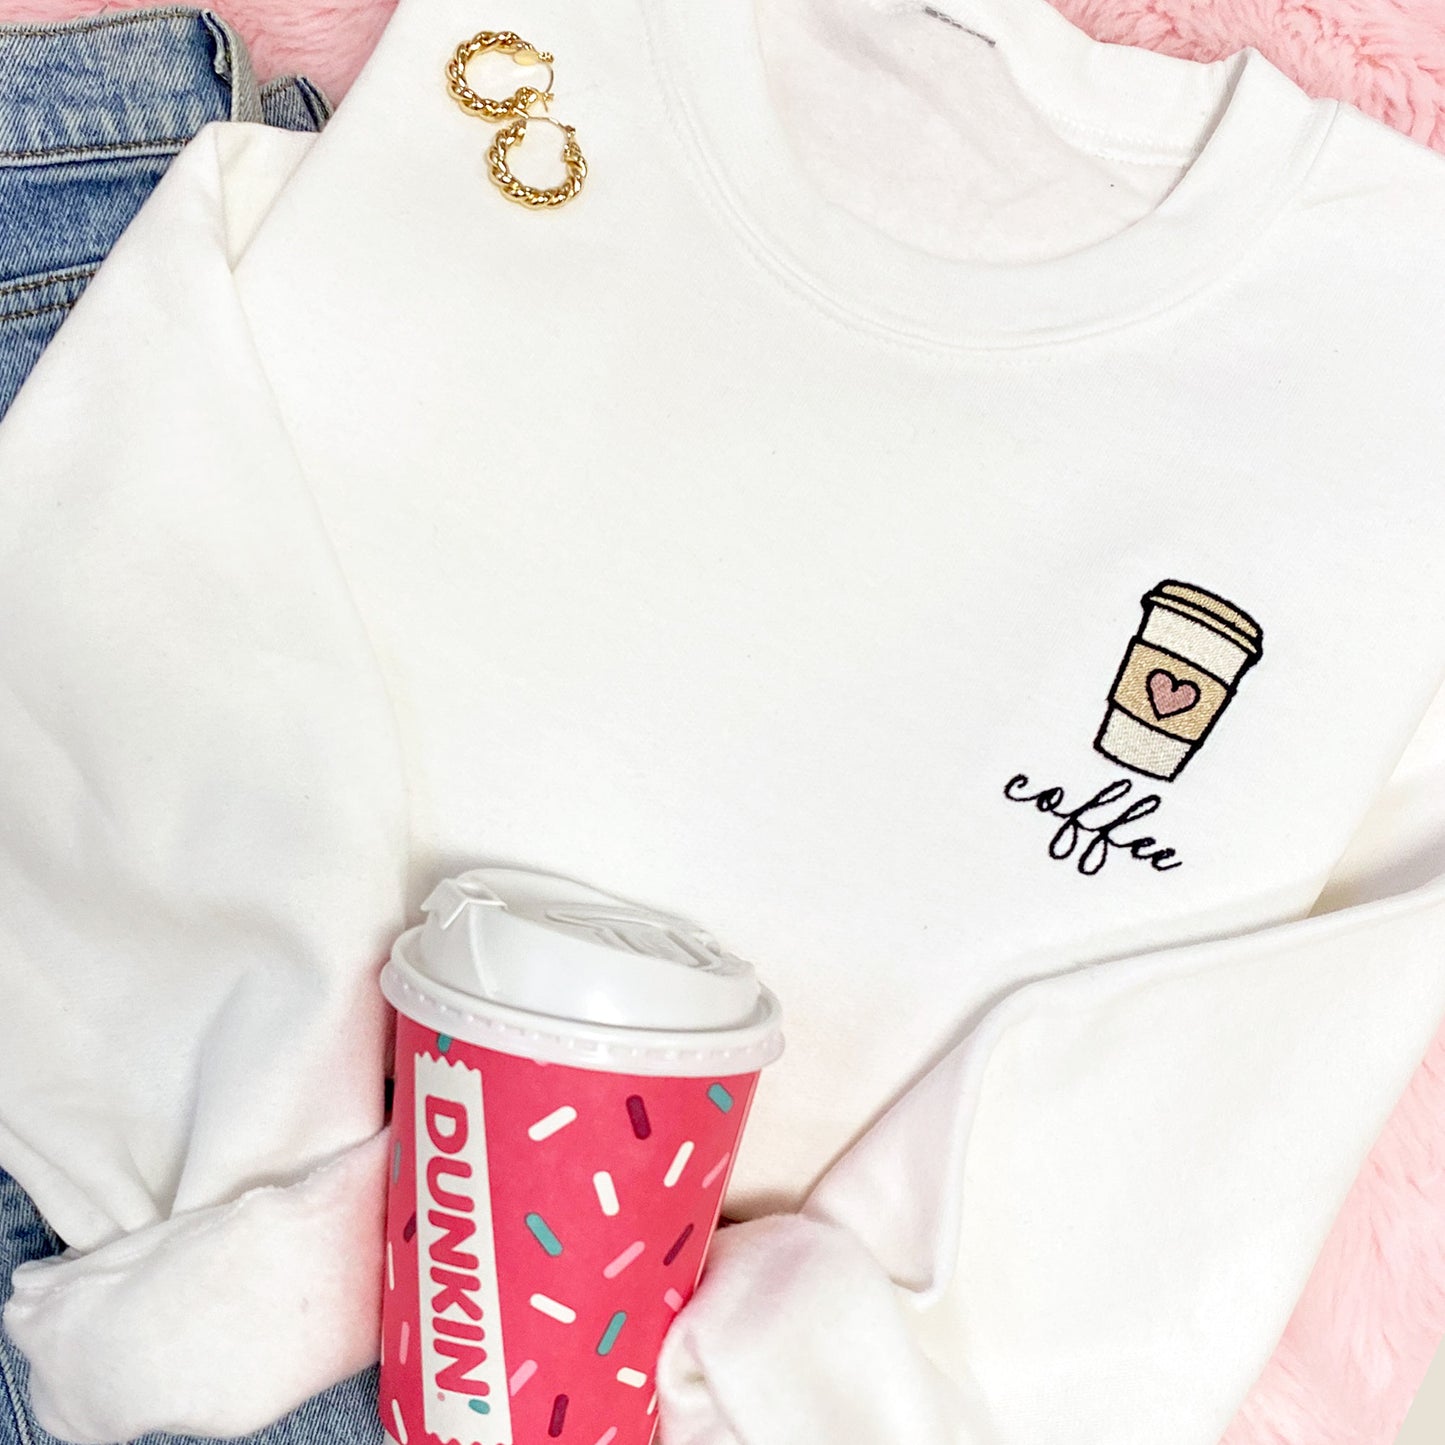 white crewneck sweatshirt with cute to-go coffee up embroidered design on the left chest